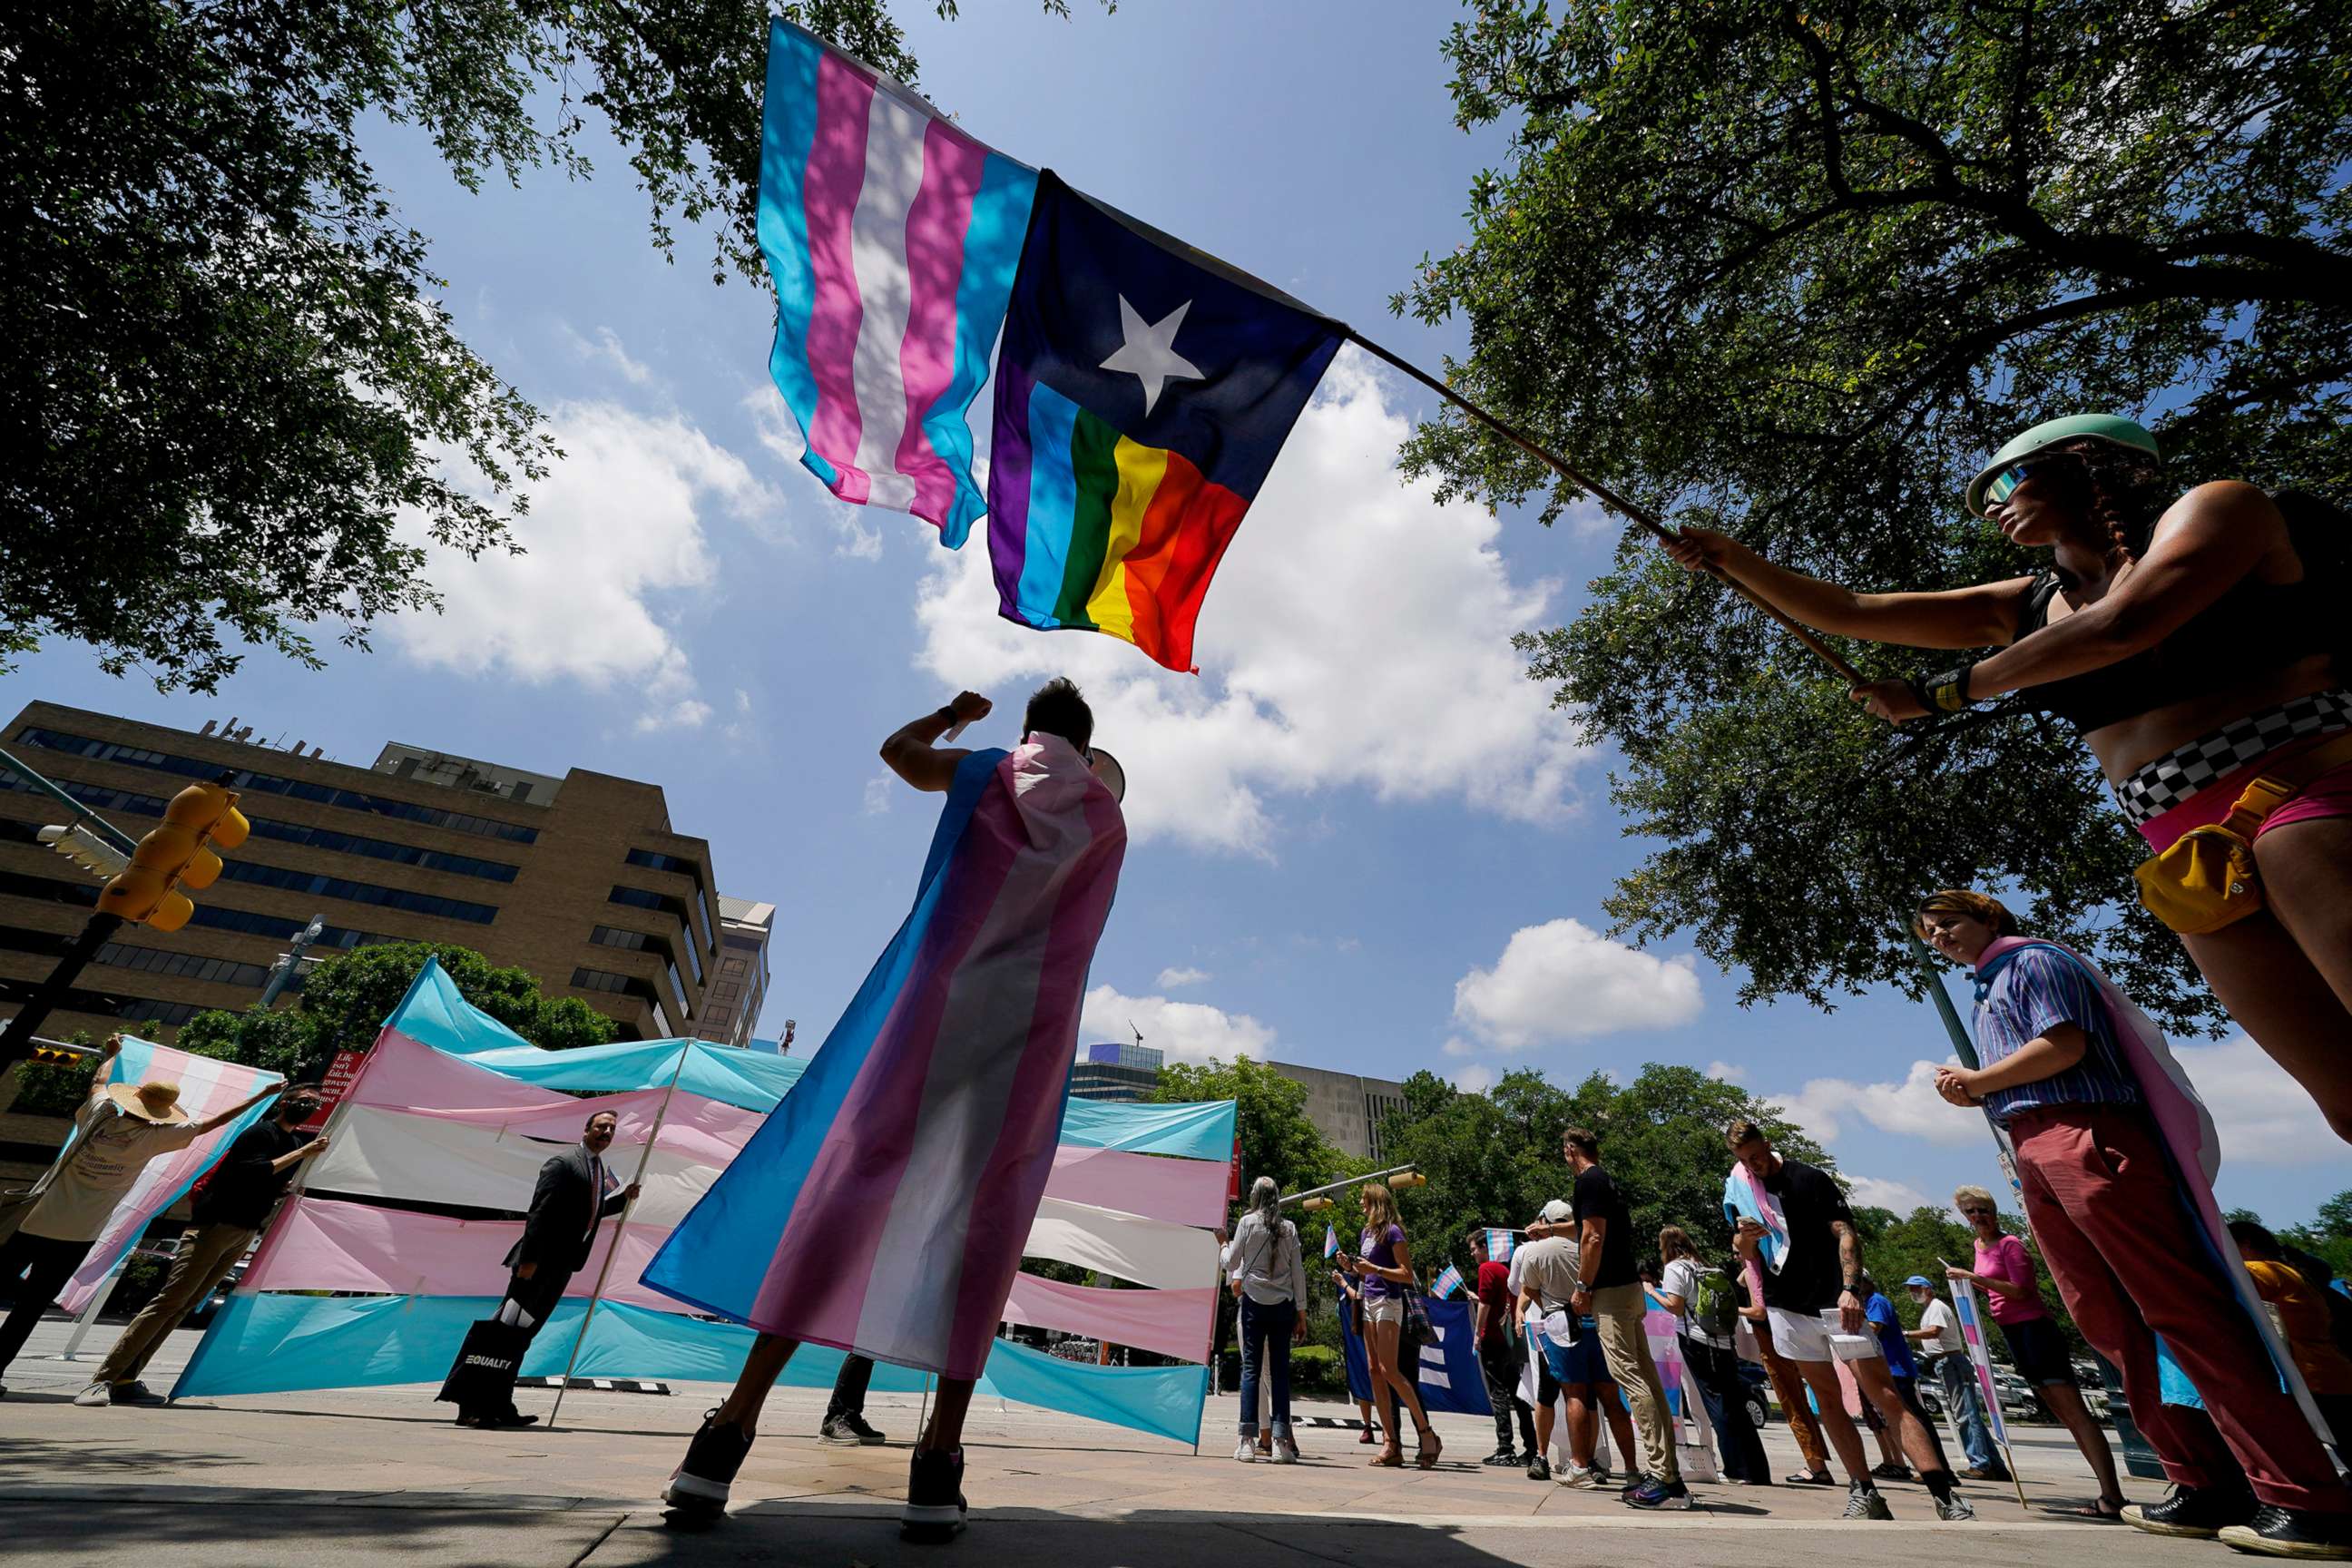 PHOTO: Demonstrators gather on the steps to the State Capitol to speak against transgender-related legislation bills being considered in the Texas Senate and Texas House, May 20, 2021 in Austin, Texas.